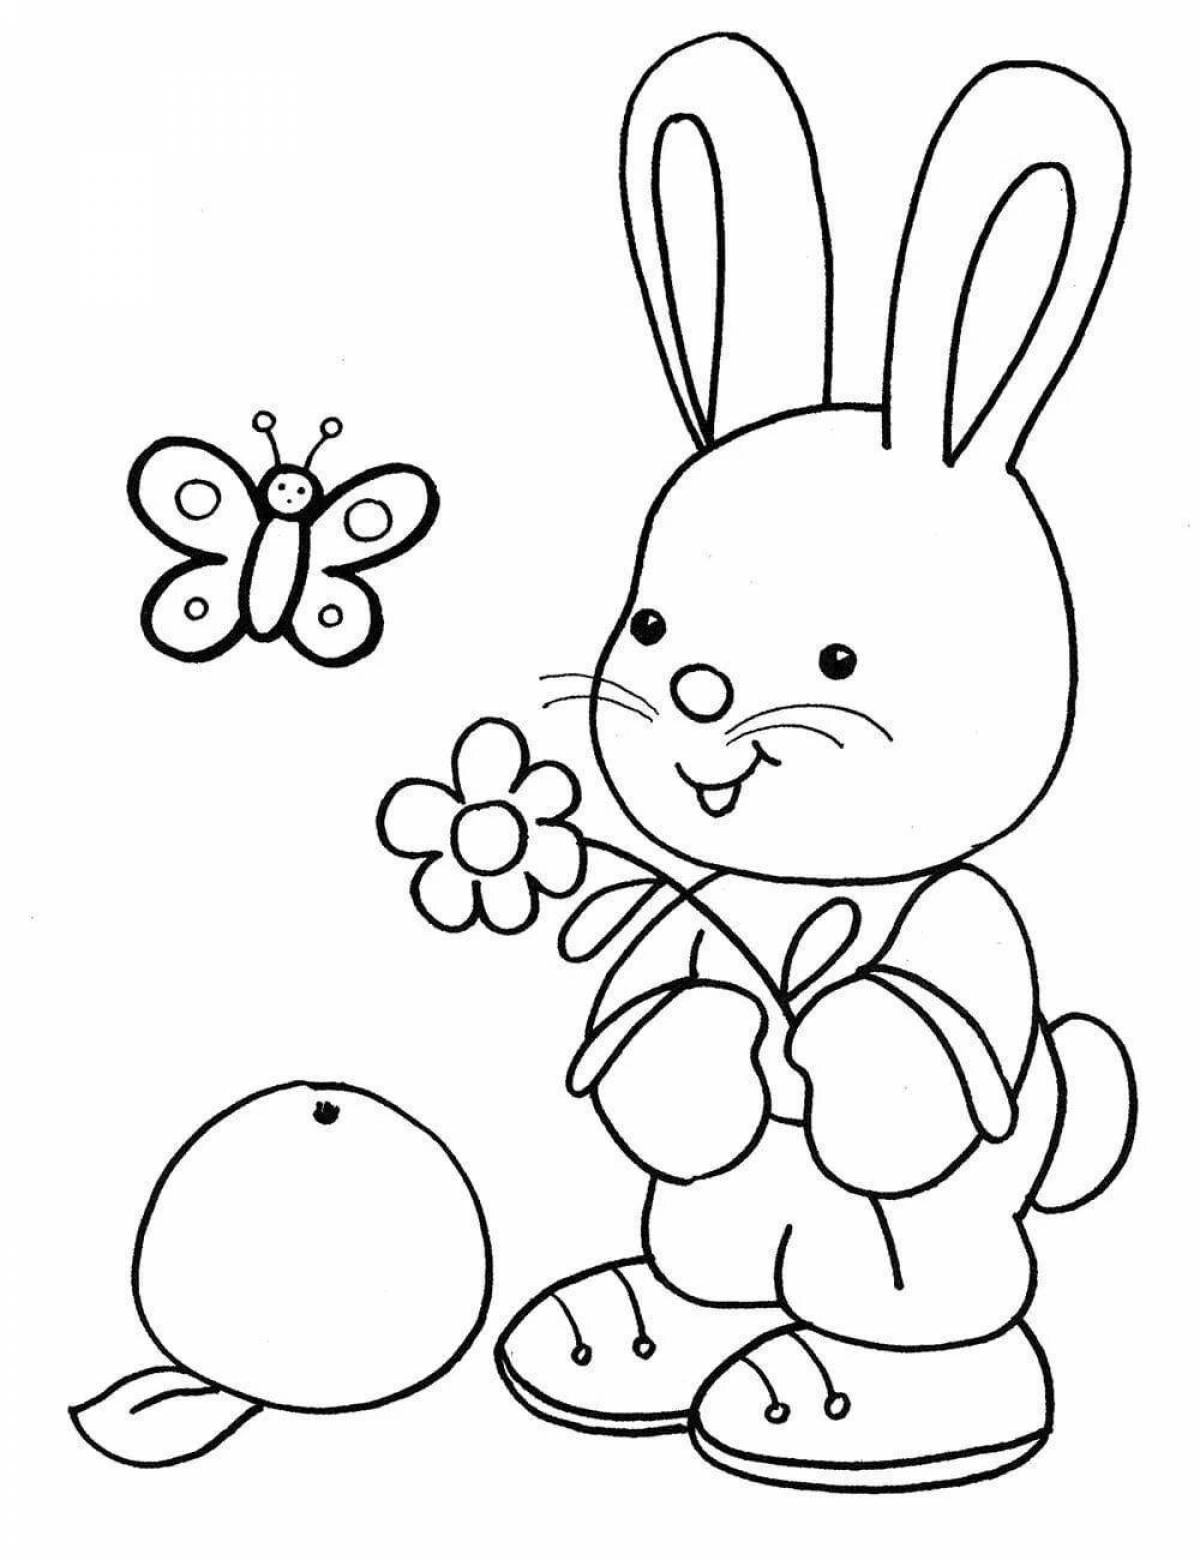 Bright 3 year old coloring book